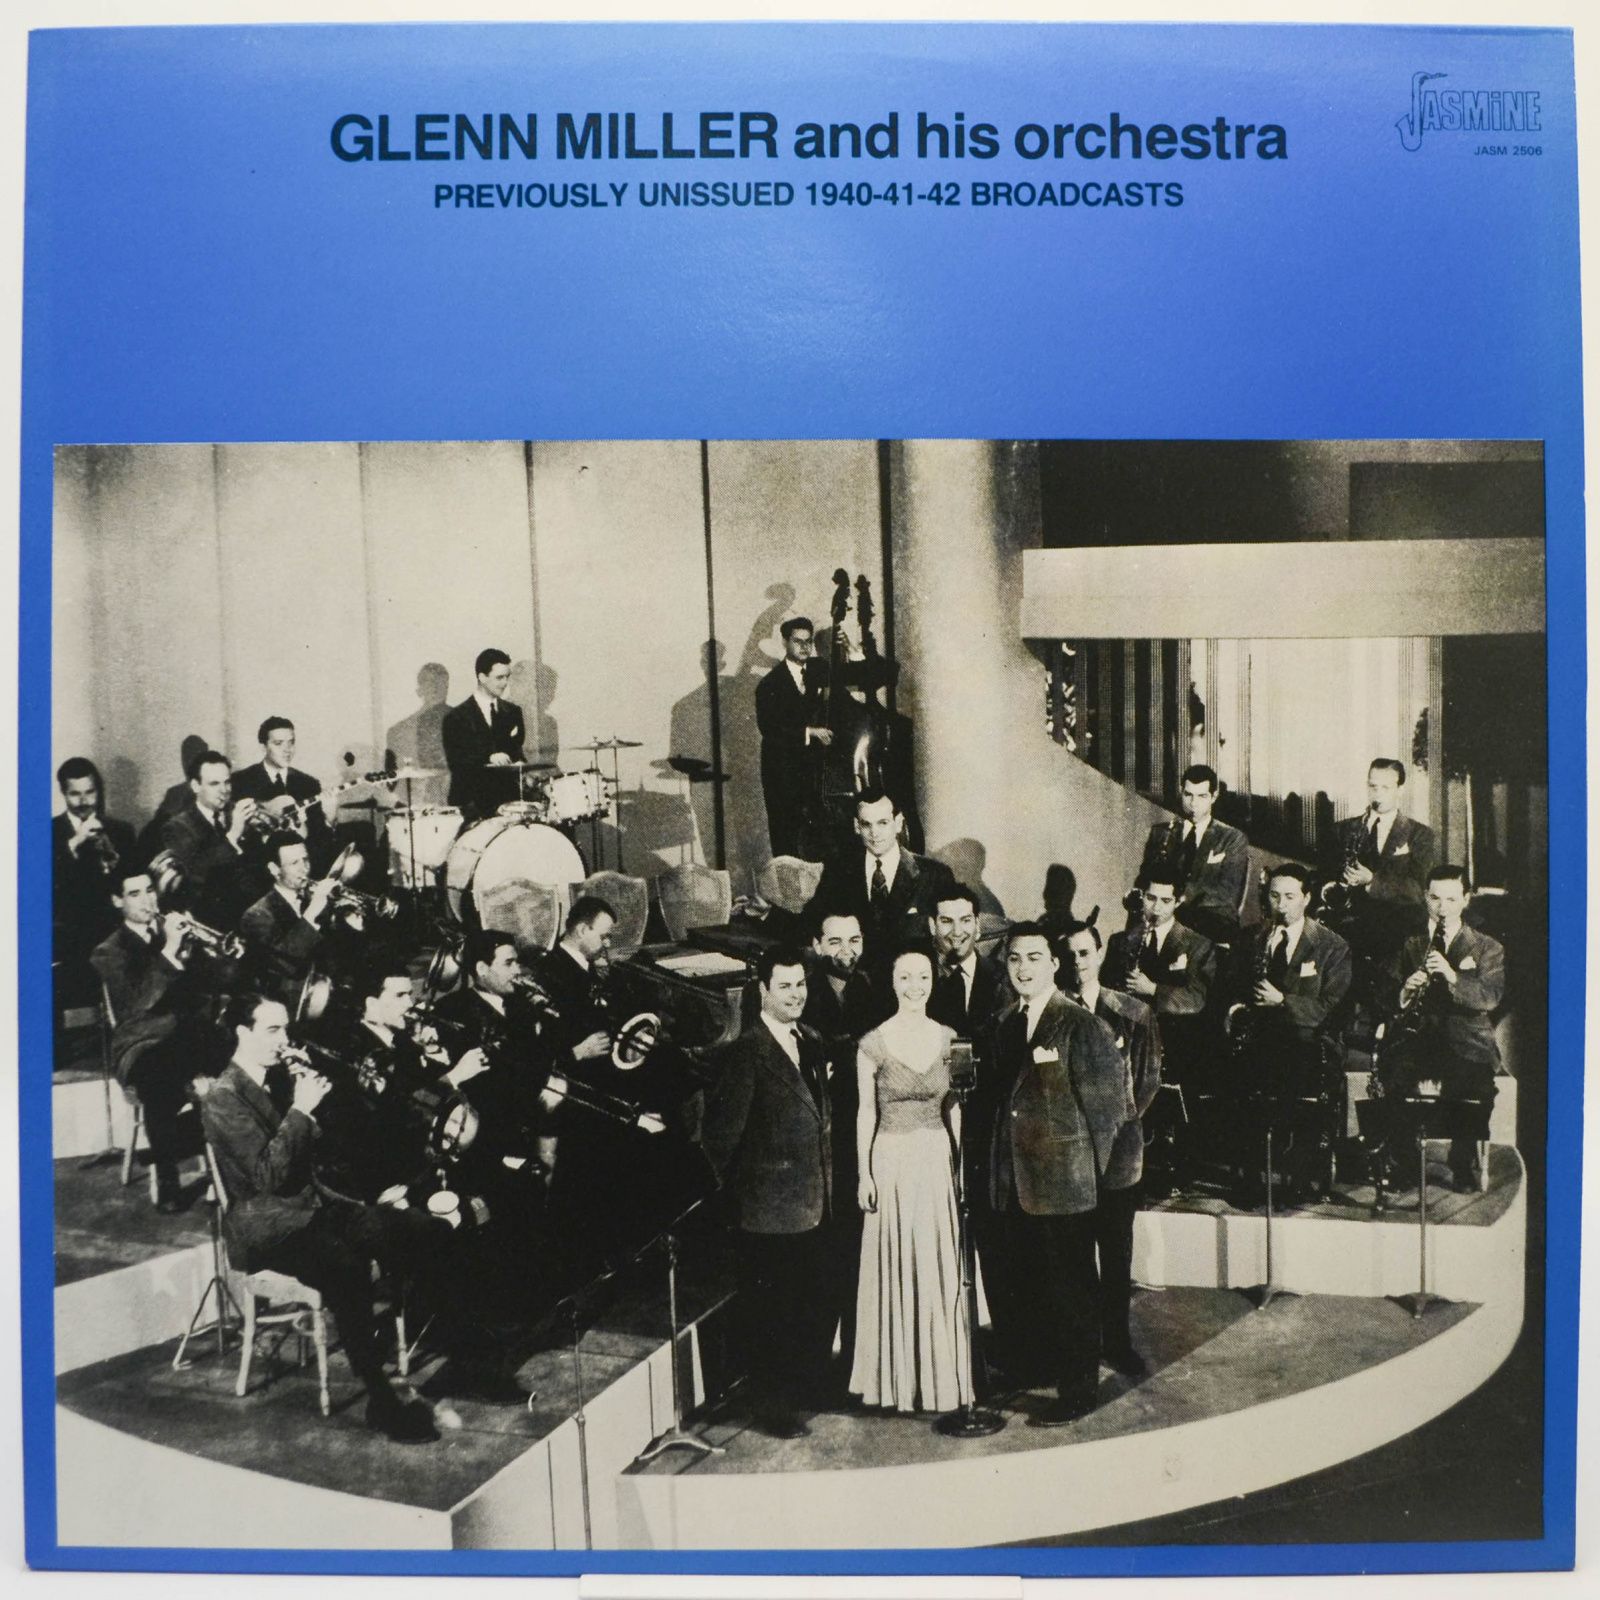 Glenn Miller And His Orchestra — Previously Unissued 1940-41-42 Broadcasts, 1985